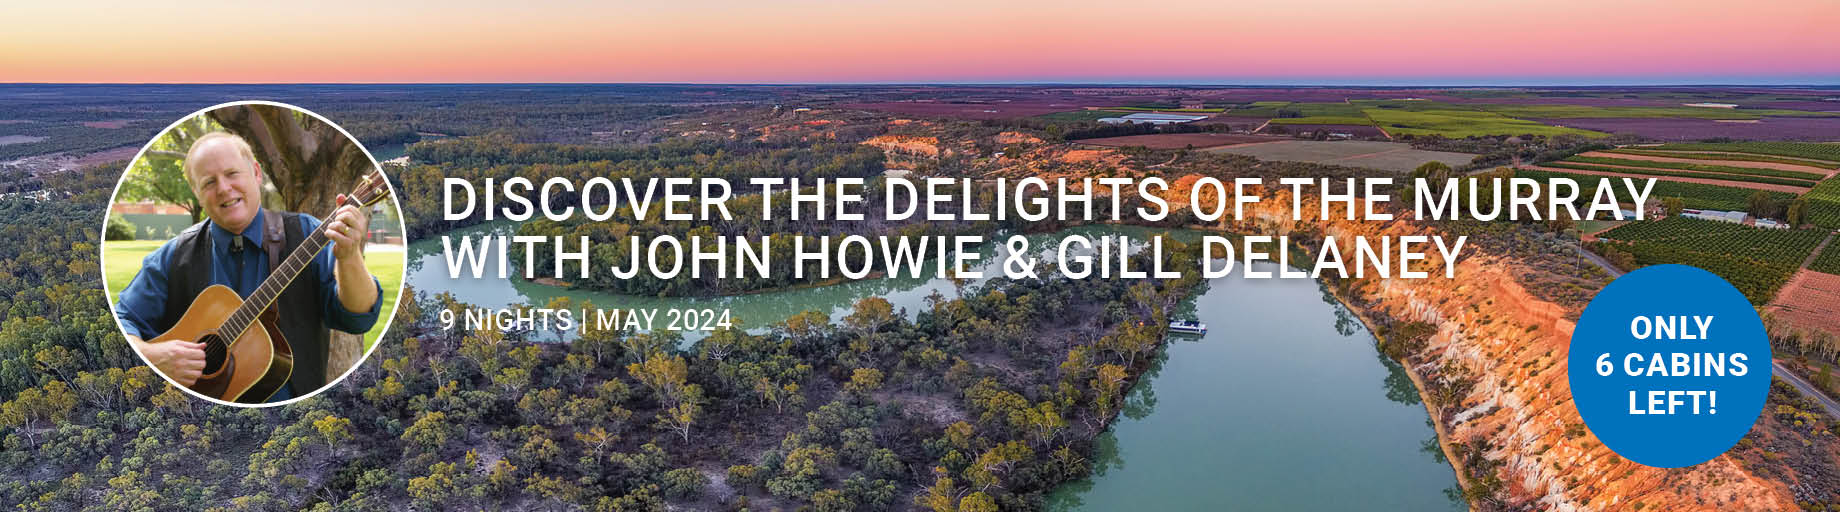 Murray River & South Australia Music Tour with John Howie